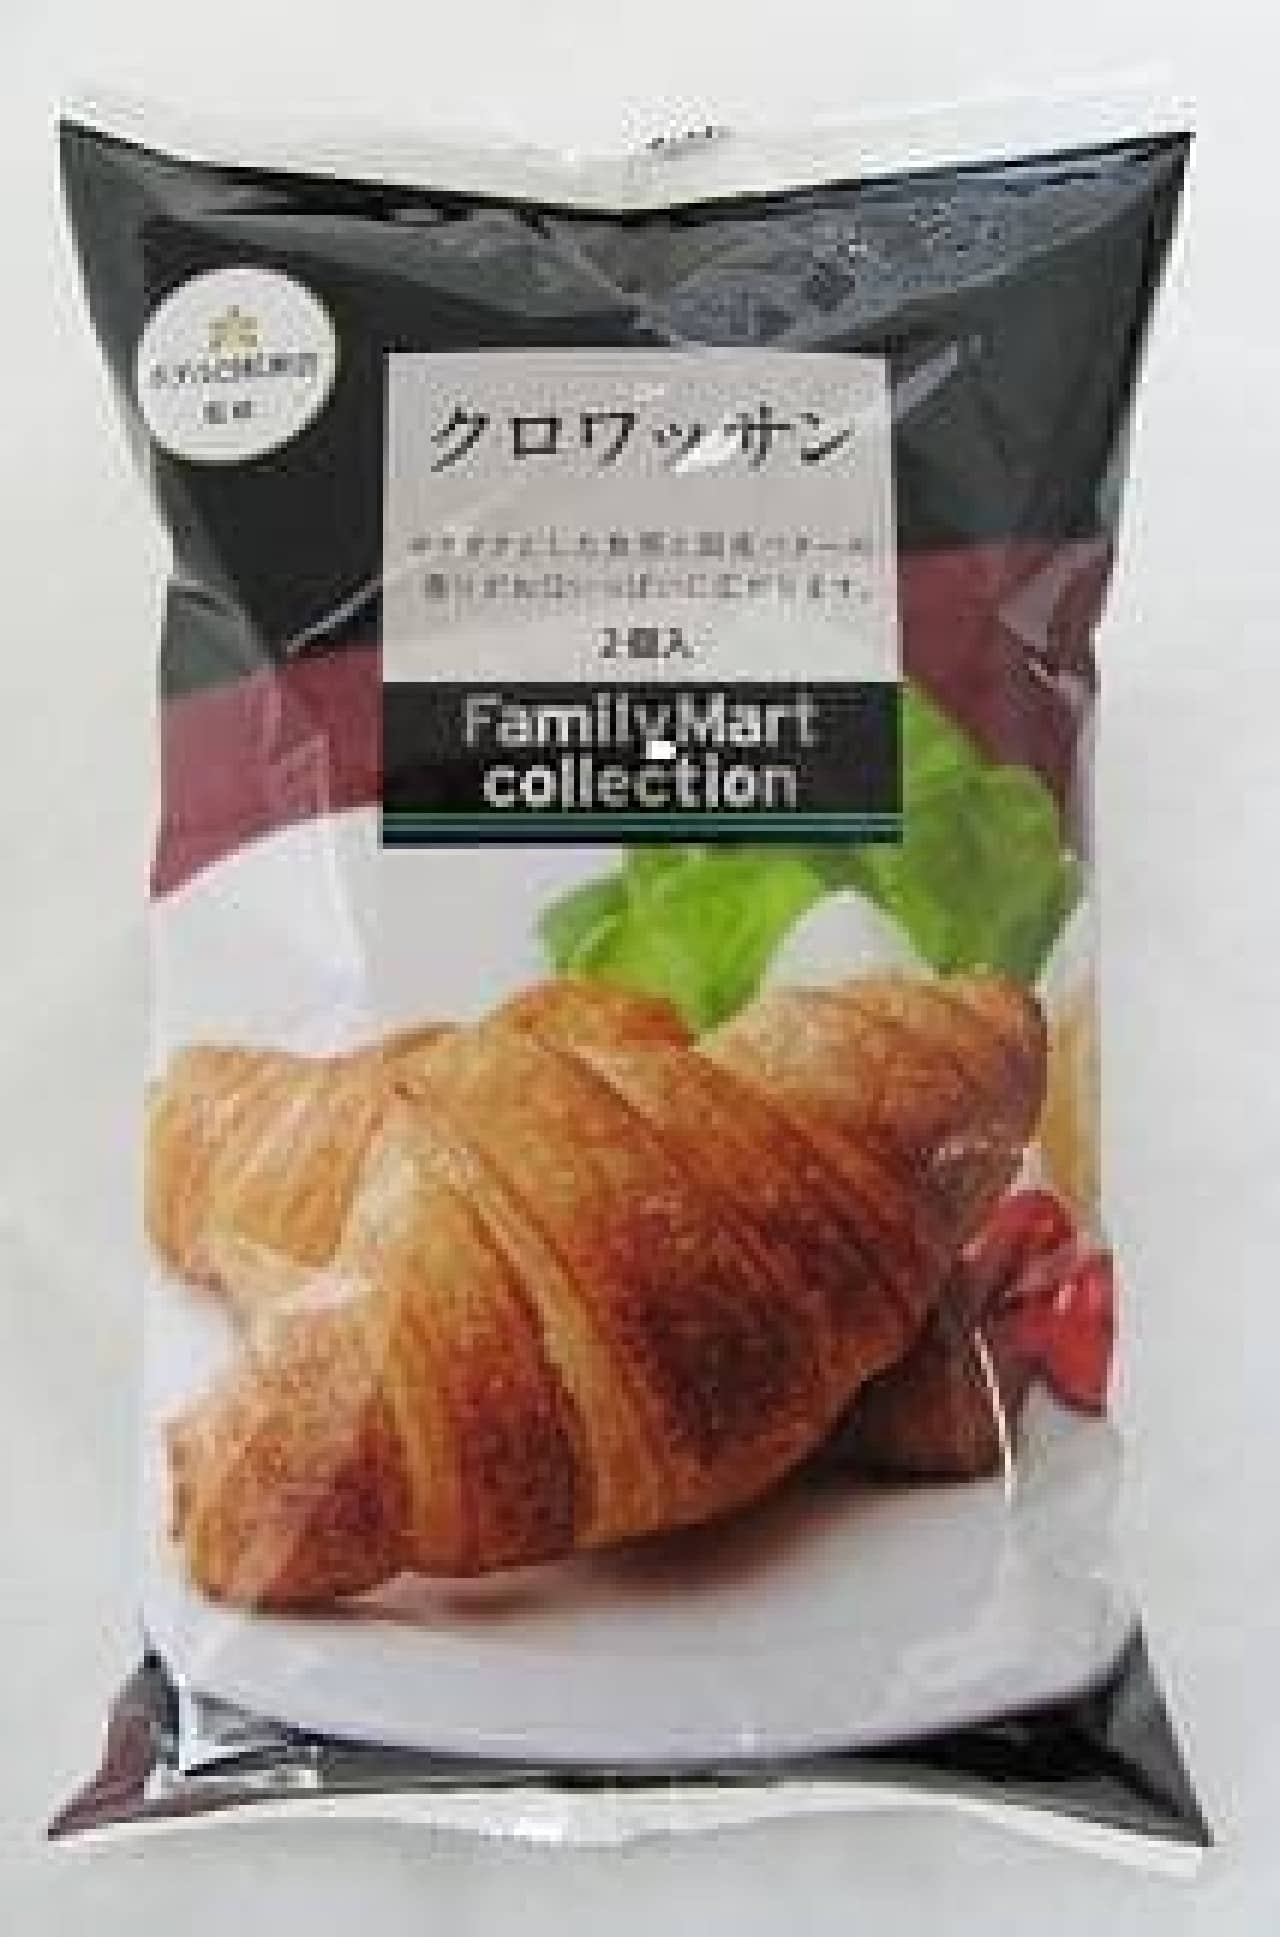 "Frozen croissant" supervised by hotel chef at FamilyMart